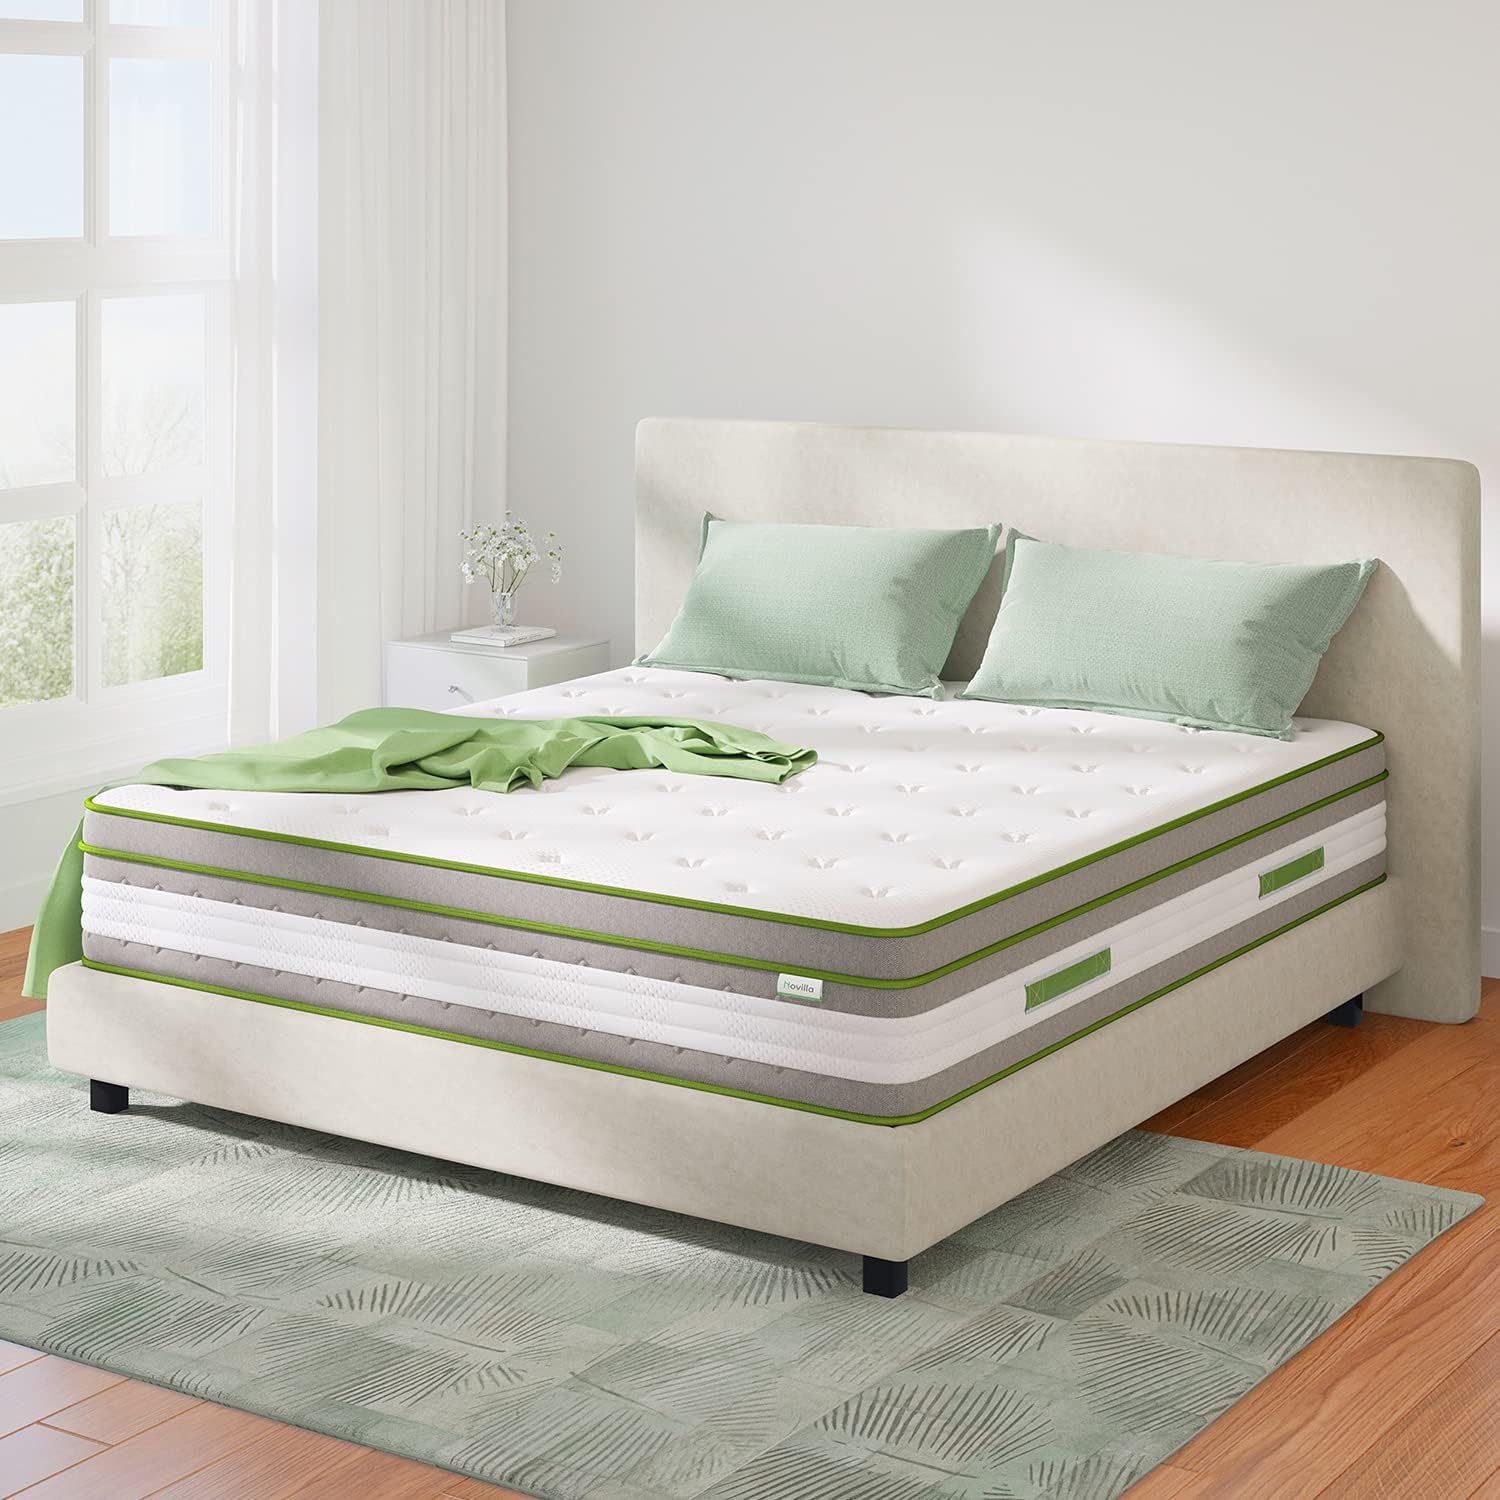 Novilla Twin Mattress, 12 Inch Hybrid Pillow Top Twin Size Mattress in a Box with Gel Memory Foam & Individually Wrapped Pocket Coils Innerspring for a Cool & Peaceful Sleep